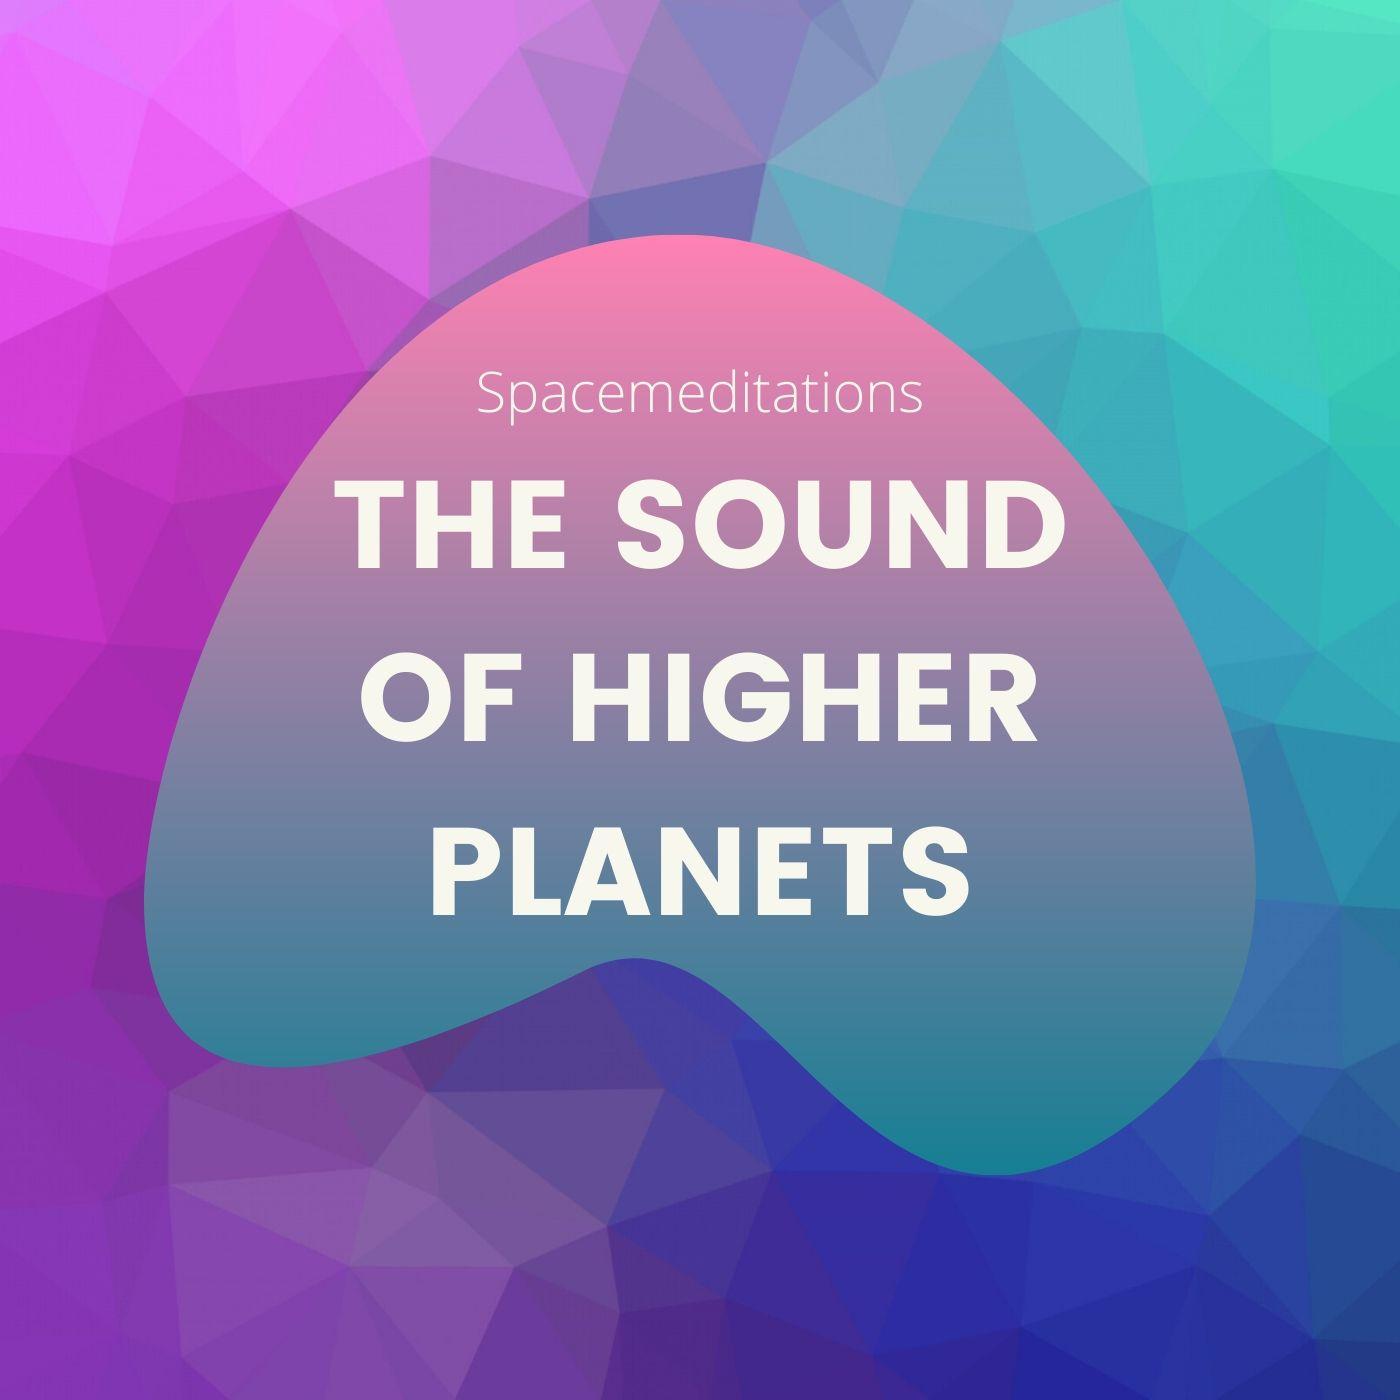 The sound of higher planets